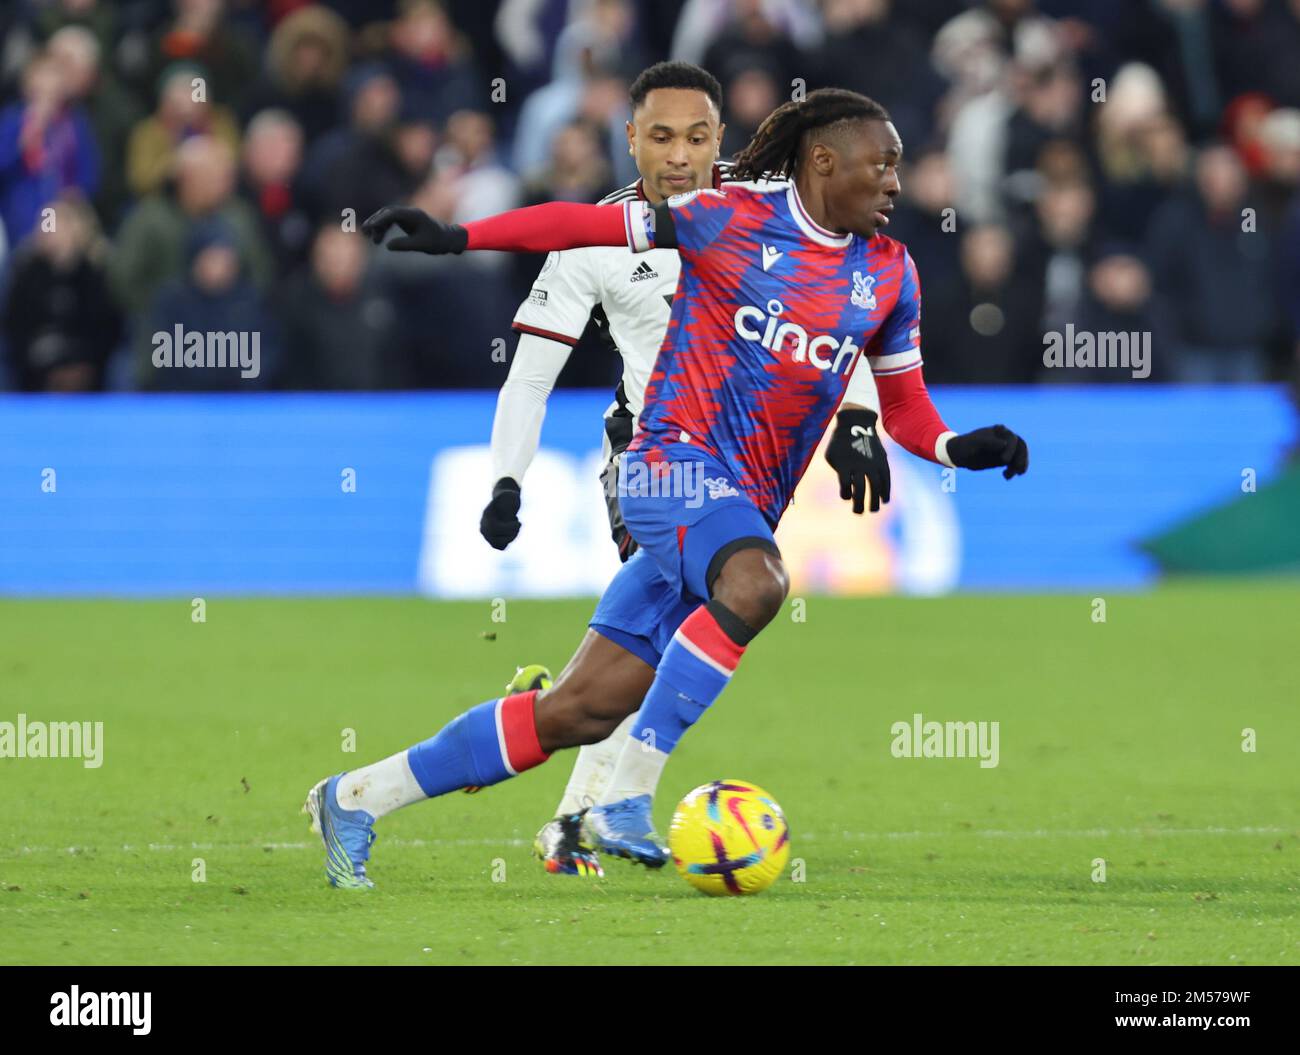 Crystal palace contra fulham